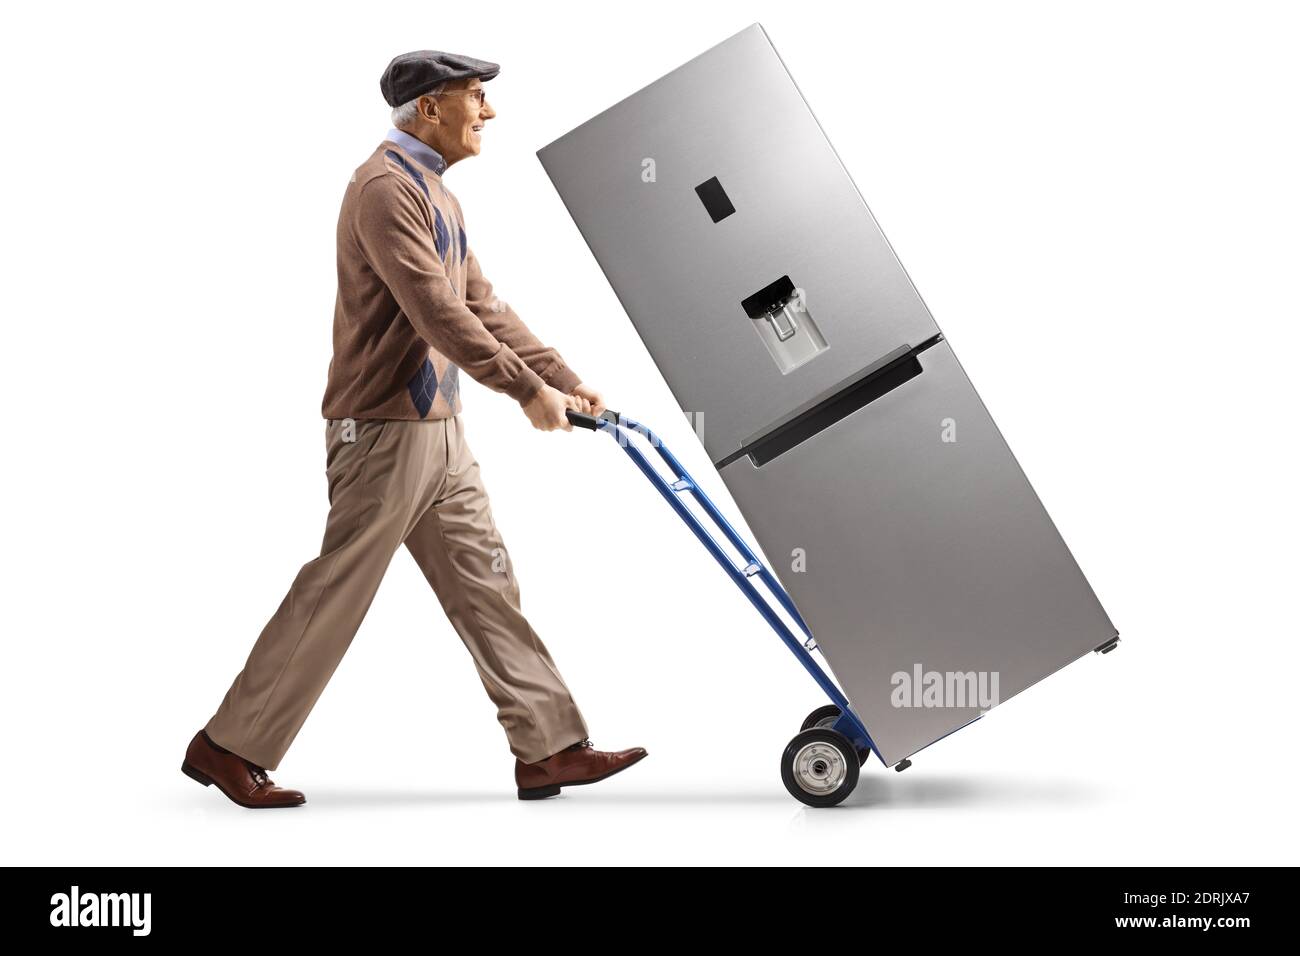 Full length profile shot of an elderly man pushing a refrigerator on a hand truck isolated on white background Stock Photo